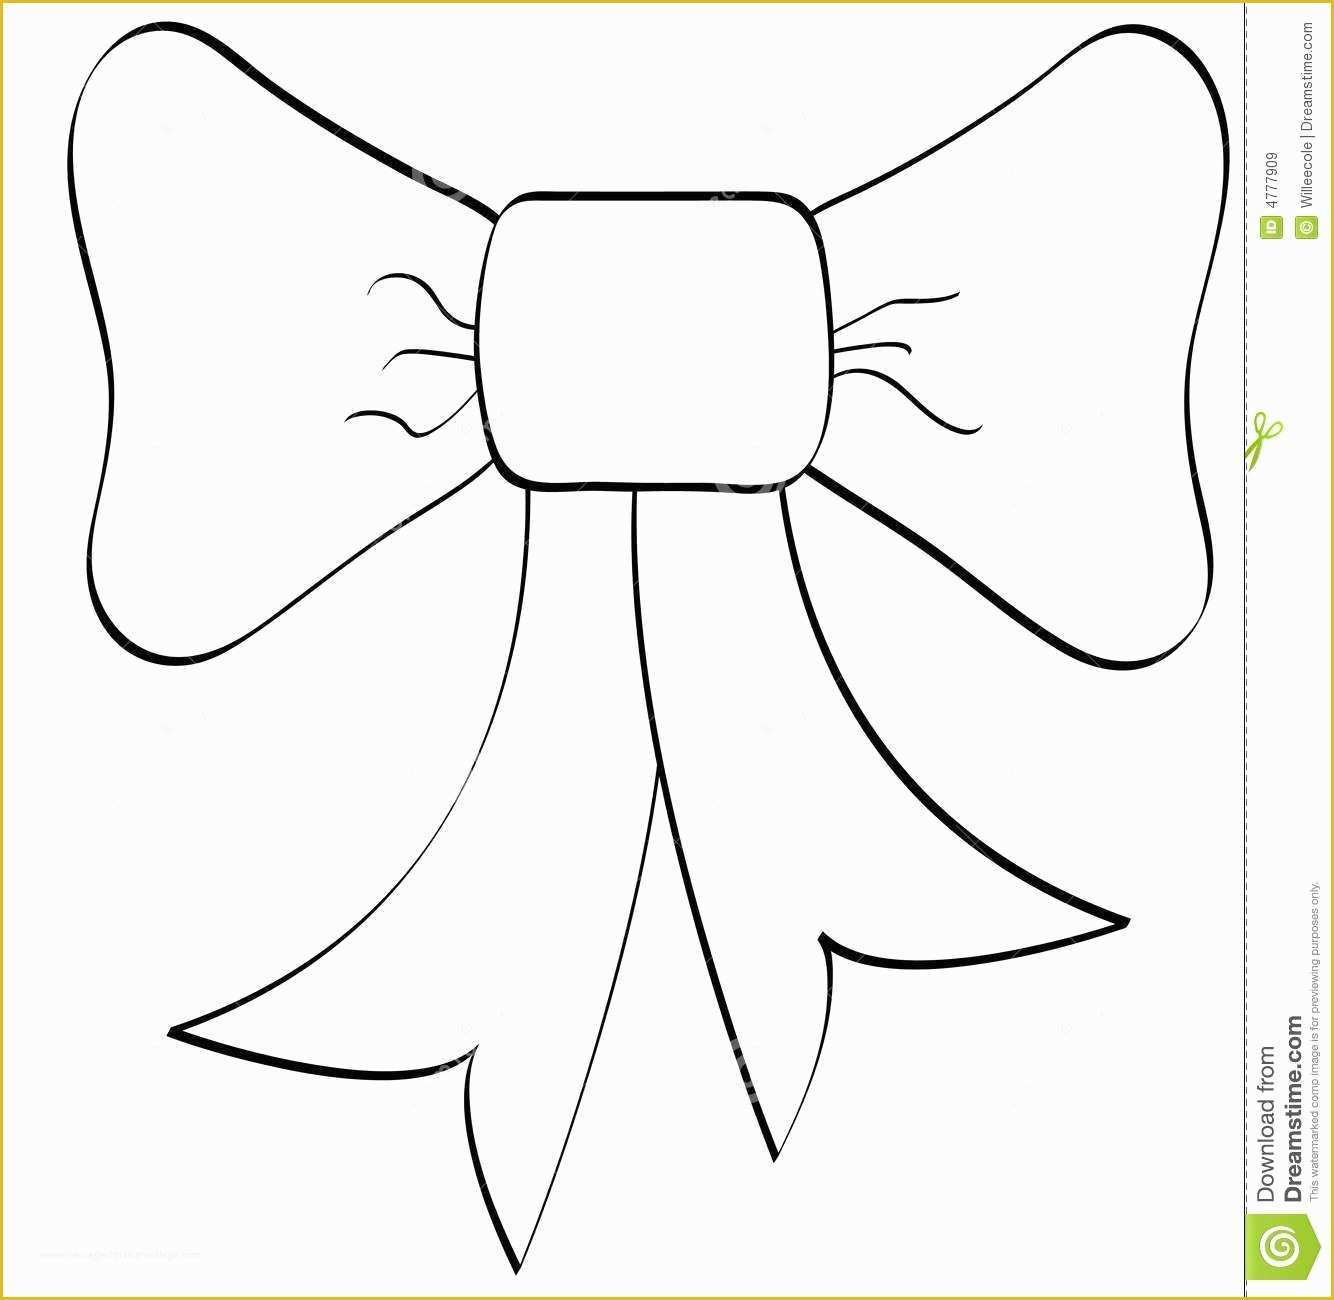 Our Best Gallery of Cheer Bow Template Printable Free.